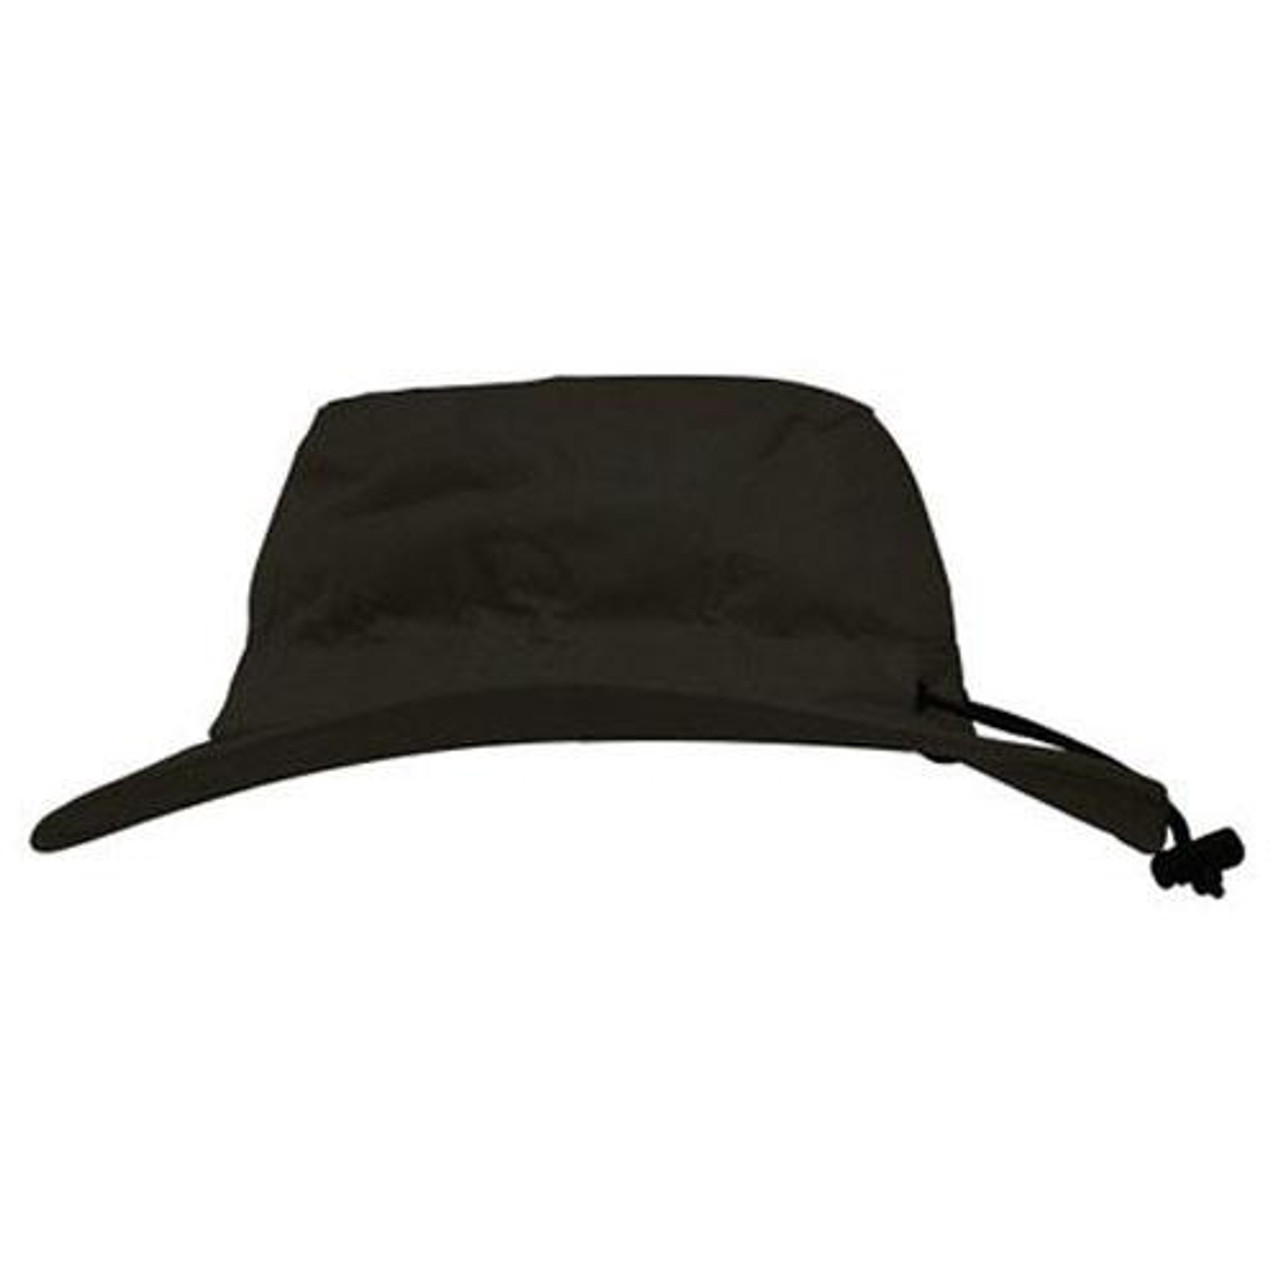 Frogg Toggs Breathable Bucket Hat Black, FTH101-01